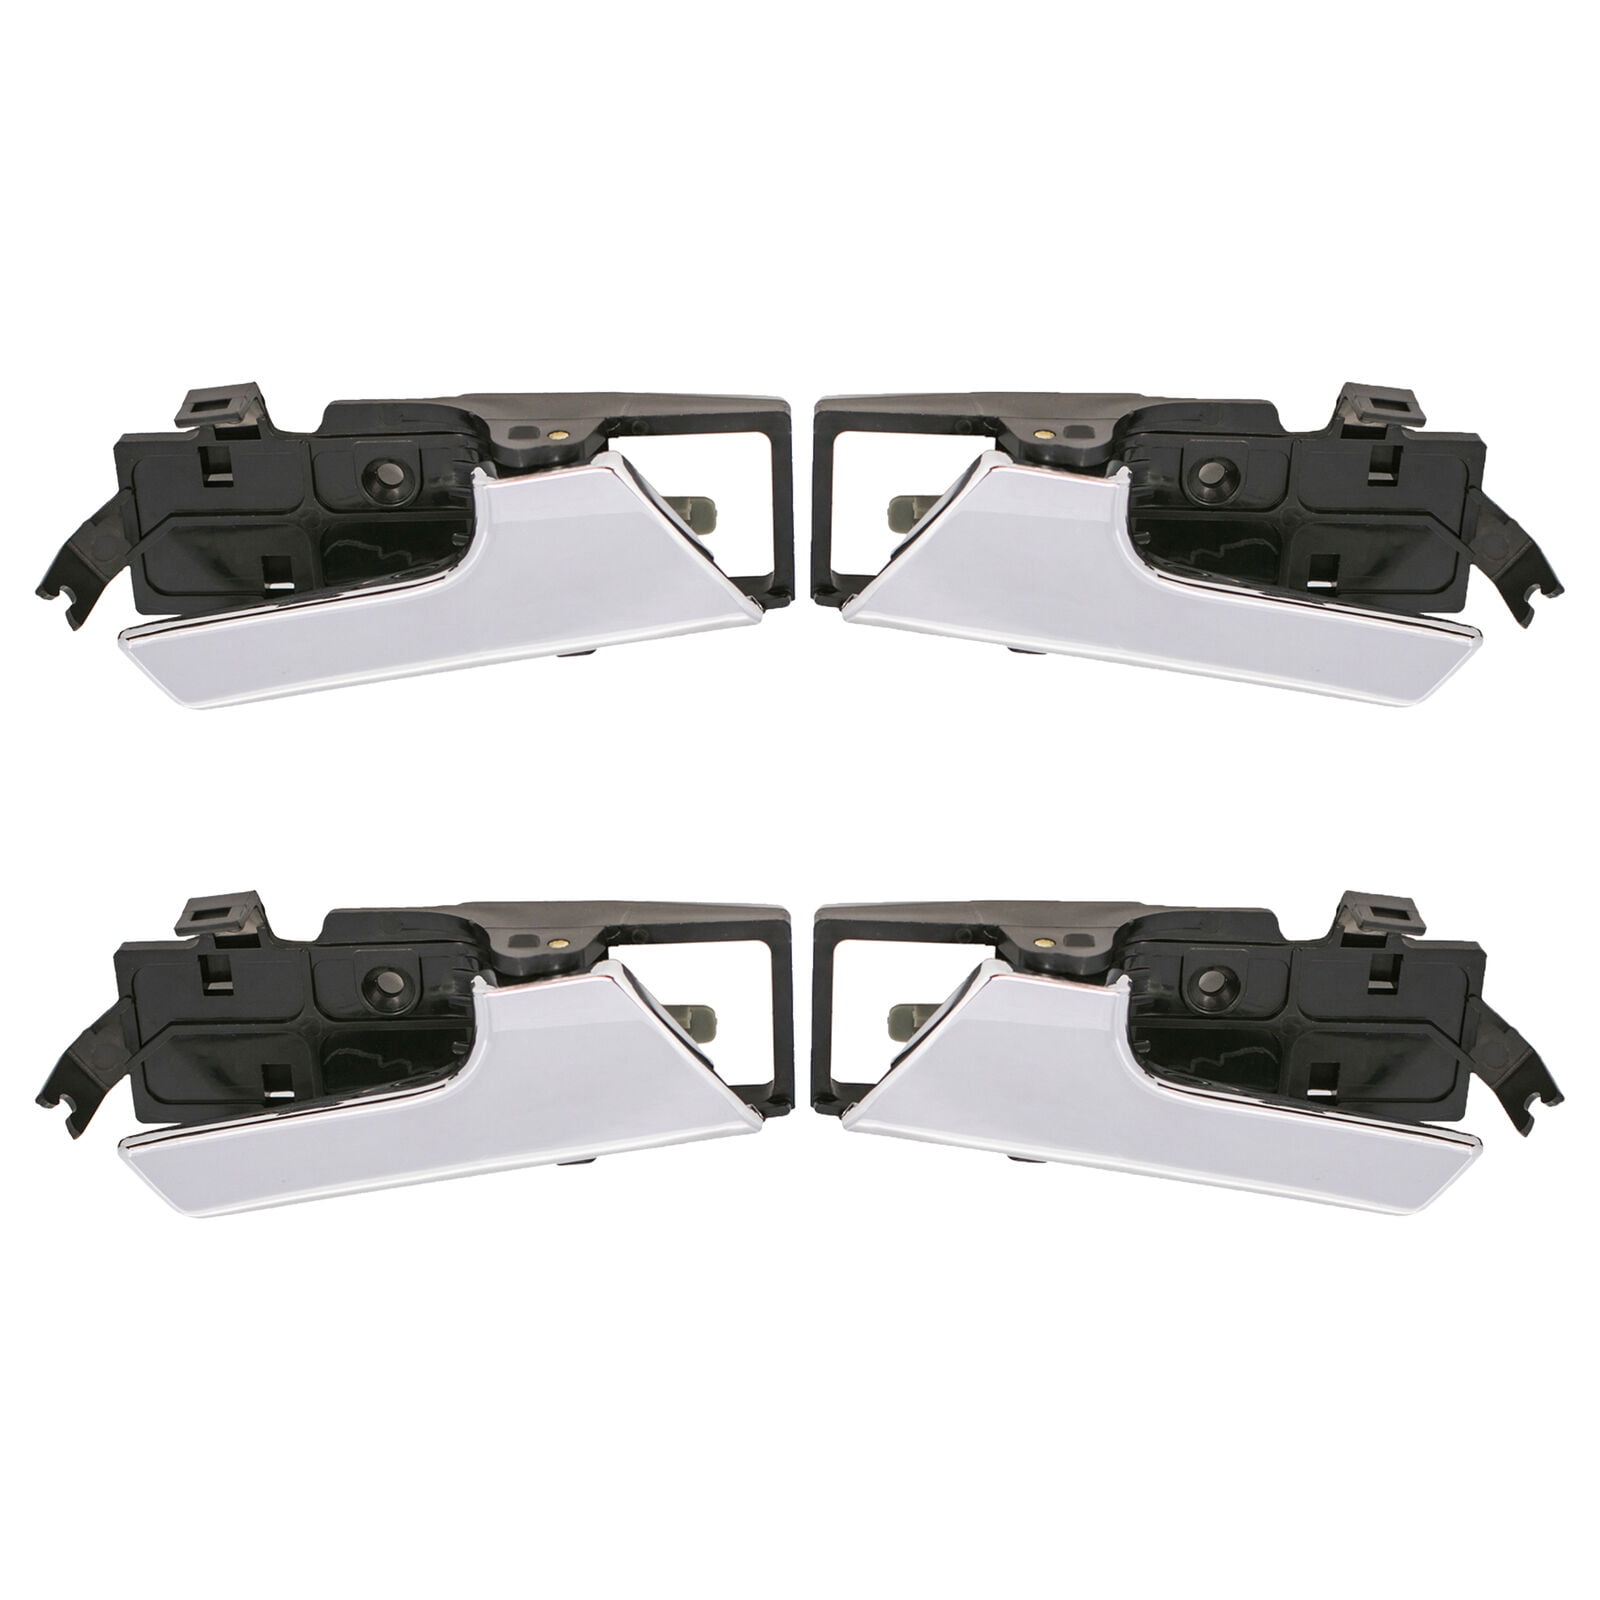 DEAL New 2pcs Left+Right Side Front or Rear Black/Chrome Lever Interior Door Handles Replacement Kit Pair Fit 07-11 Chevy Aveo Sedan 09-11 Aveo5 Hatchback 09-10 Pontiac G3 09 Wave 